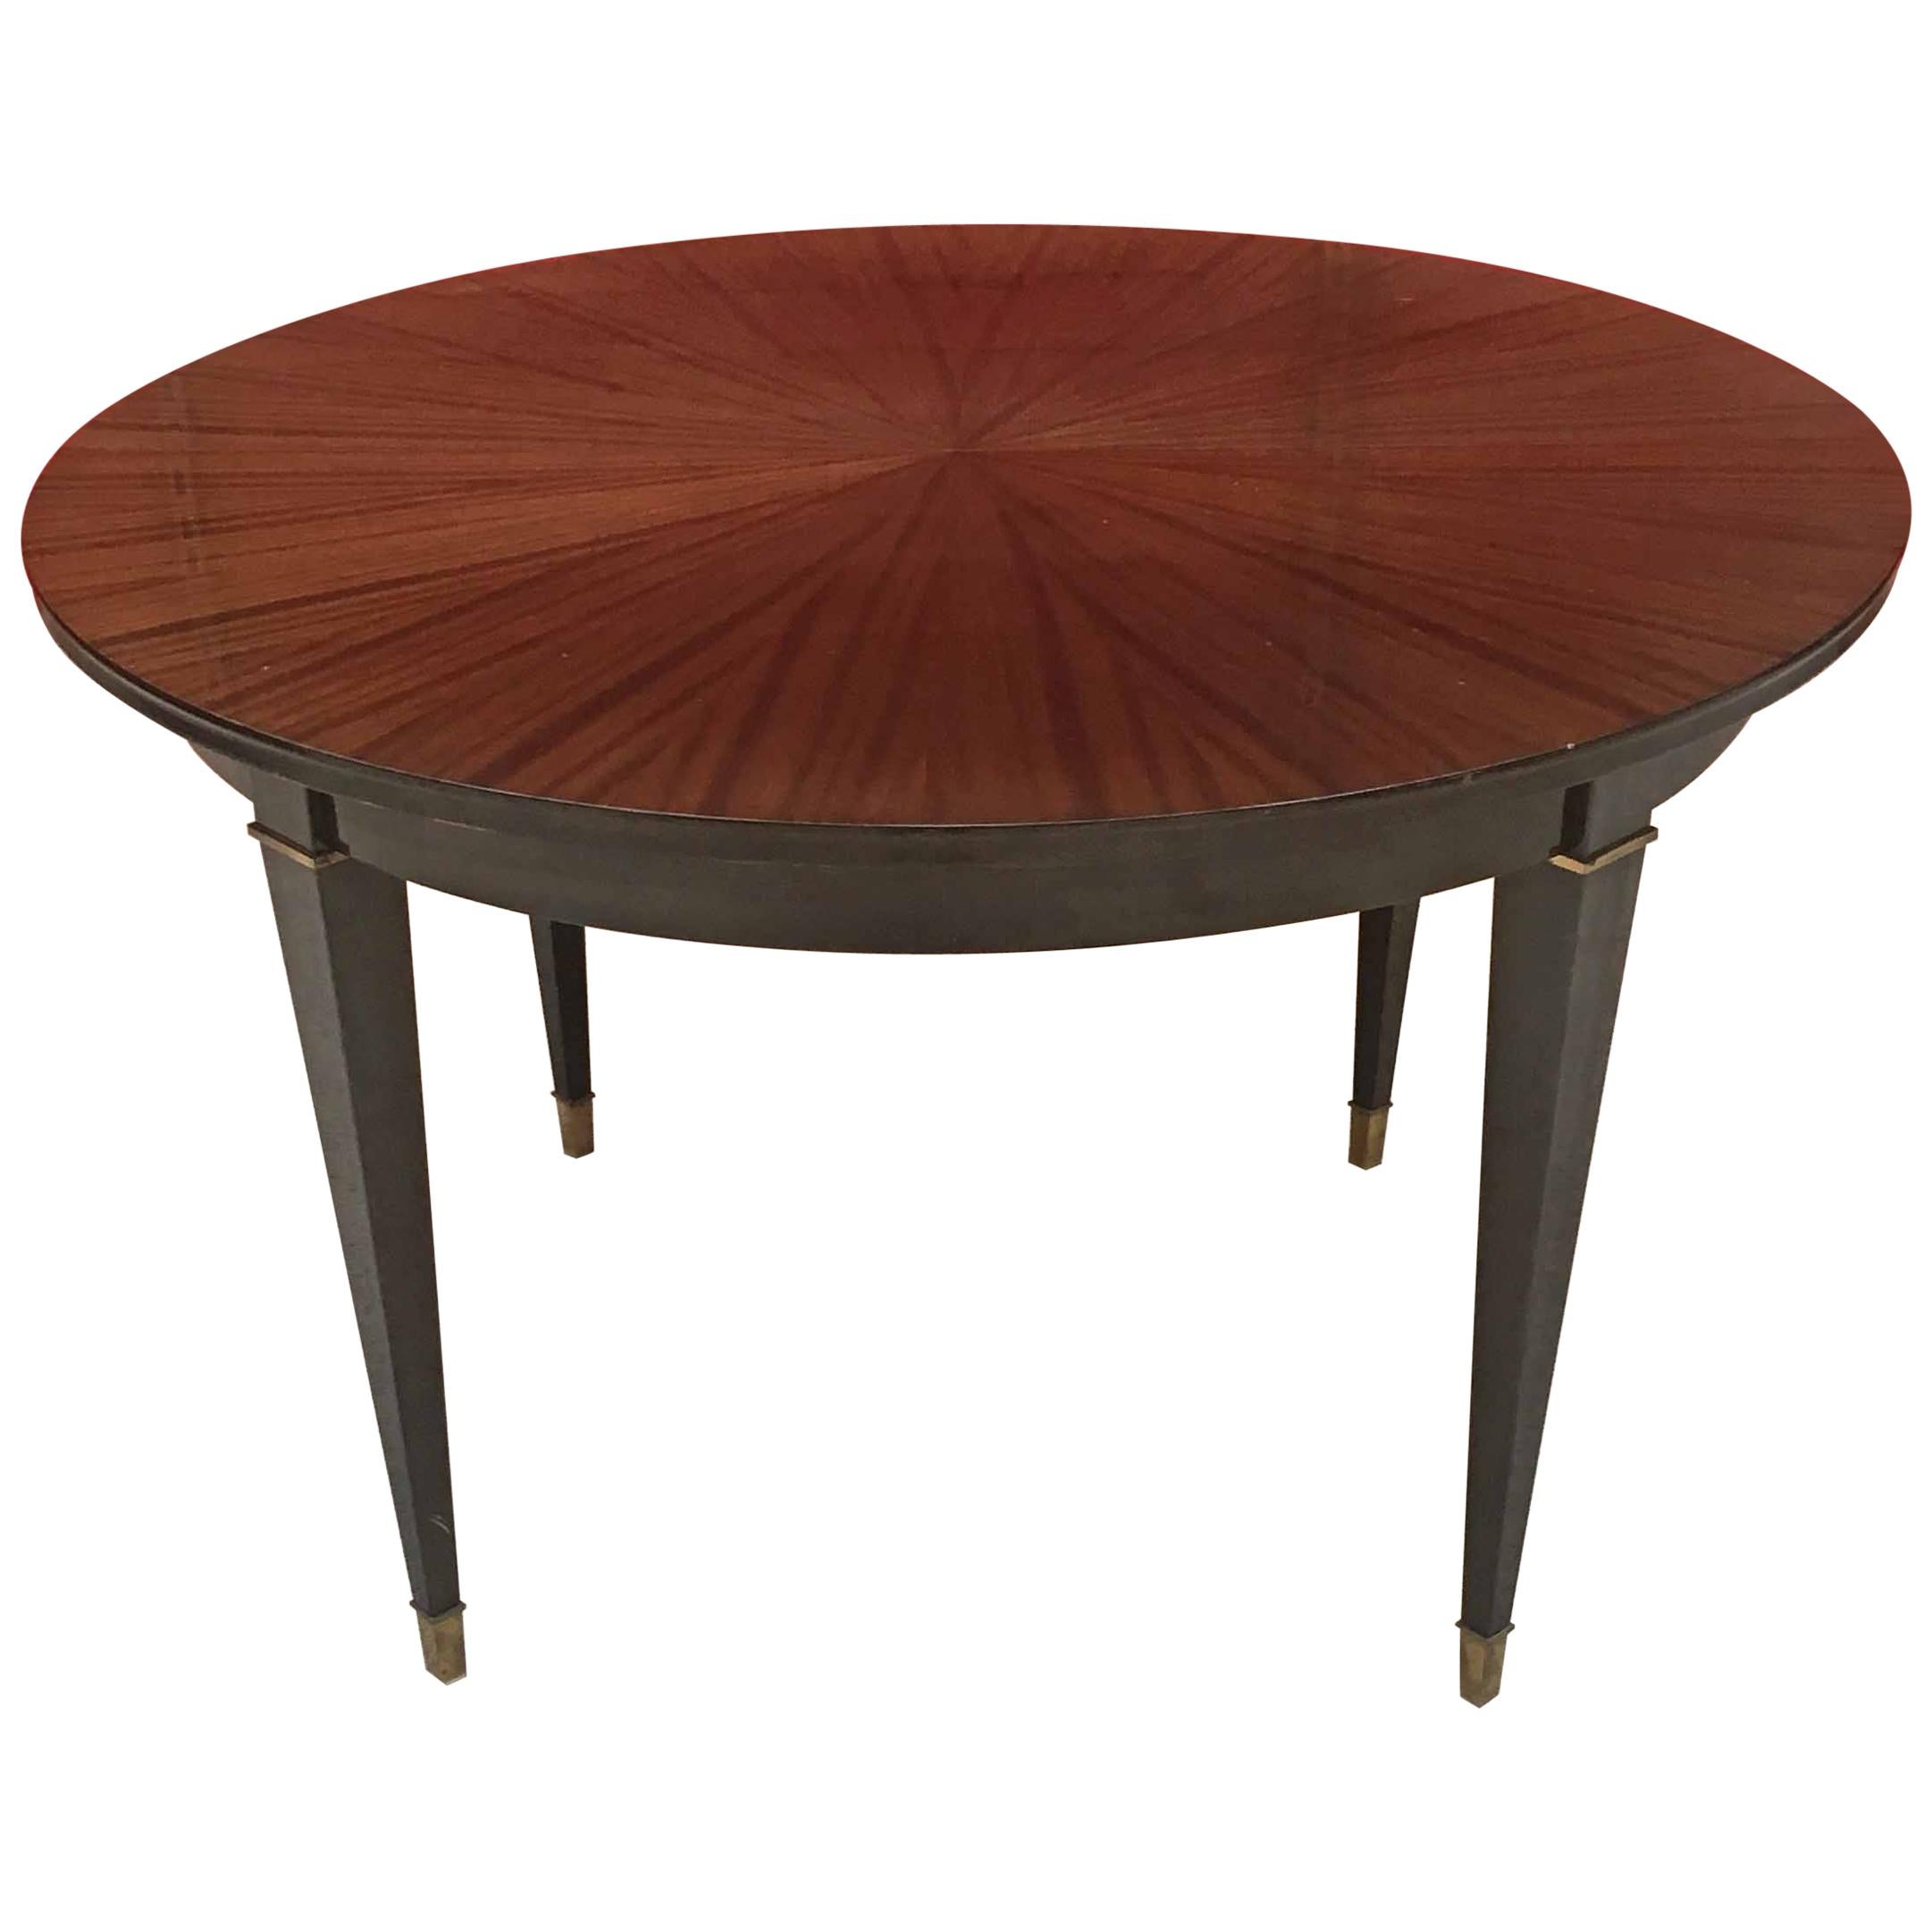 Neoclassical Art Deco Table in Mahogany circa 1950 the Varnish is Insolarized